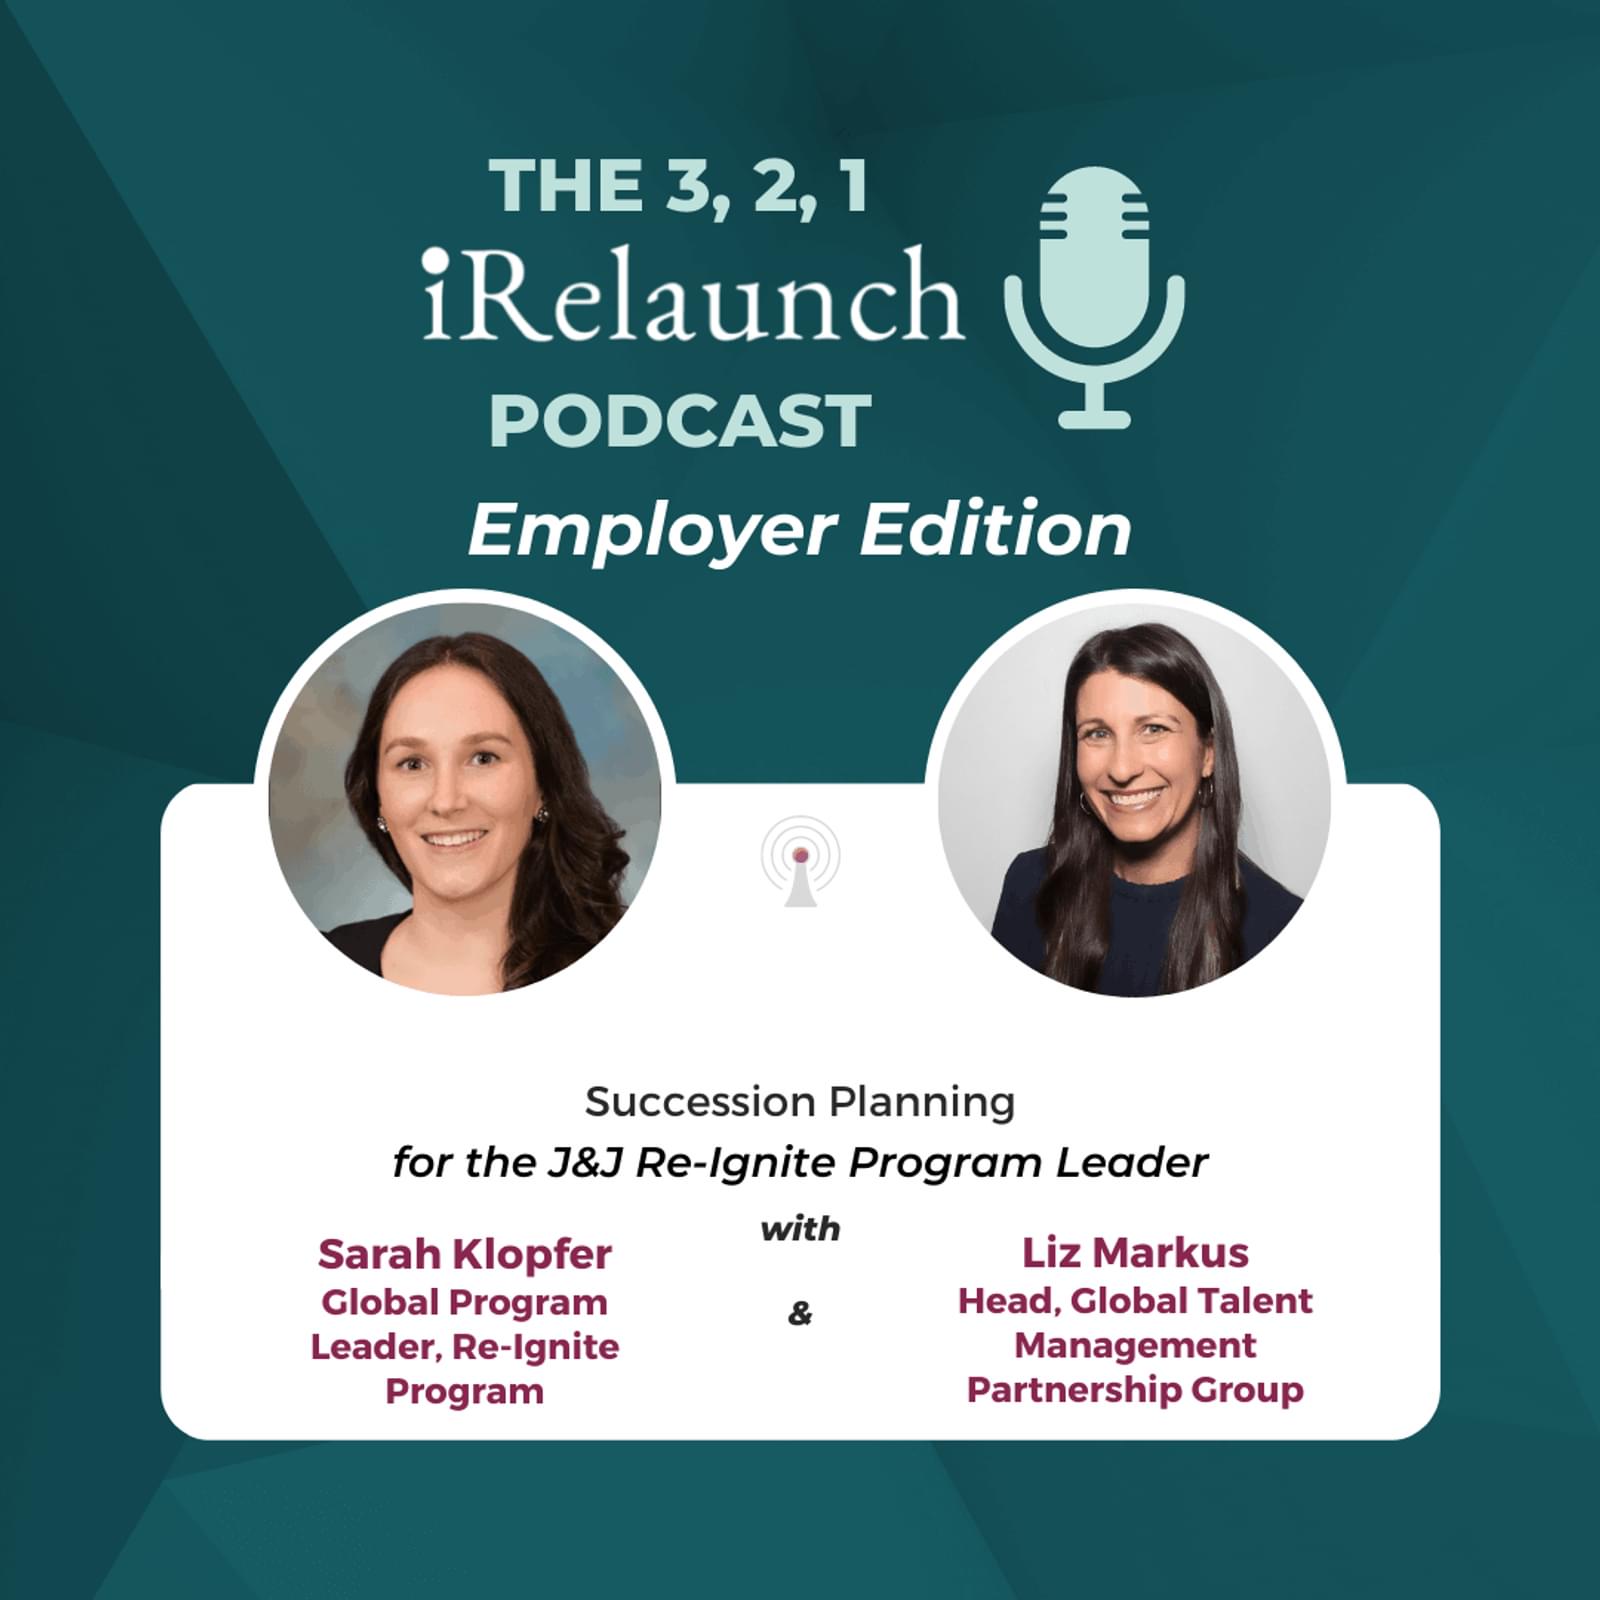 3 2 1 i Relaunch Podcast Employer Edition 1080 x 1080 03 Succession Planning